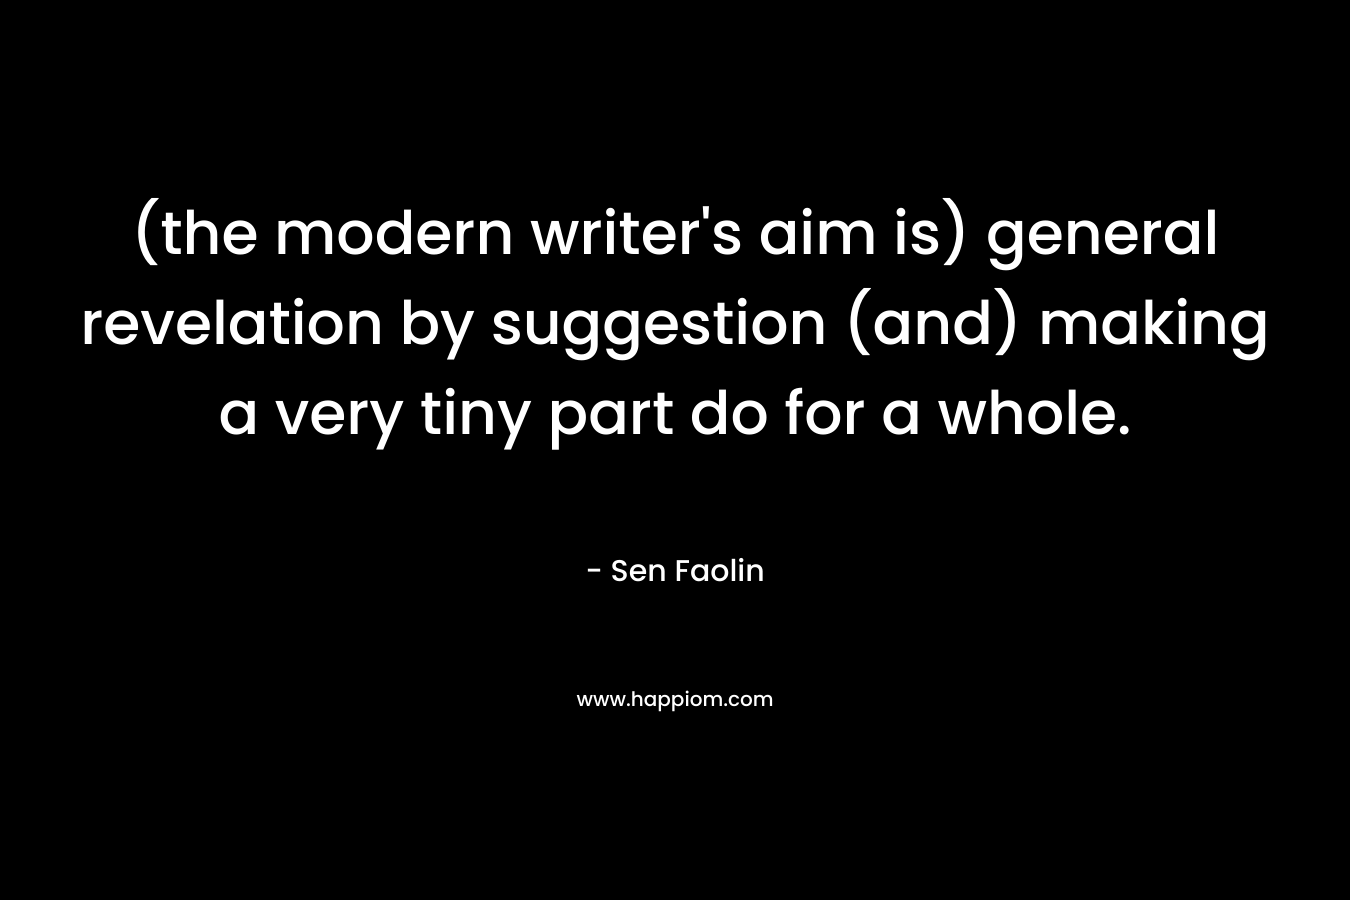 (the modern writer's aim is) general revelation by suggestion (and) making a very tiny part do for a whole.